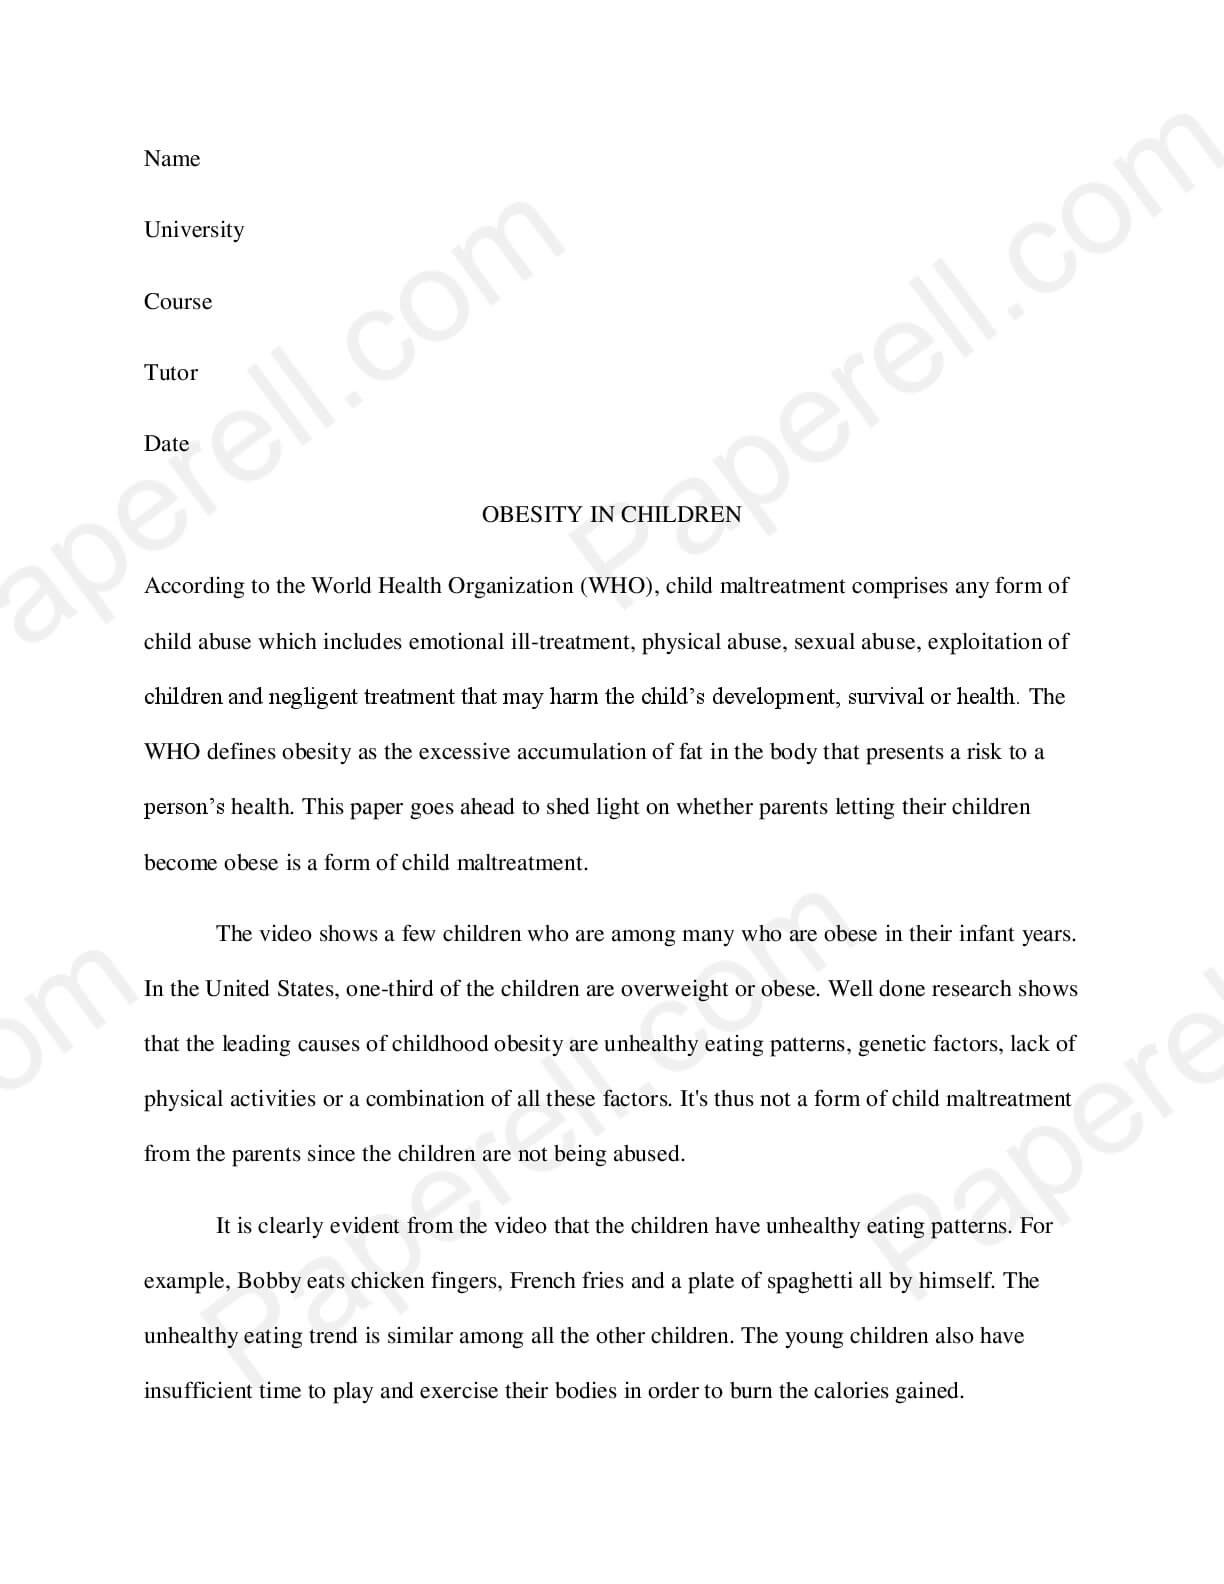 Do academic research essay